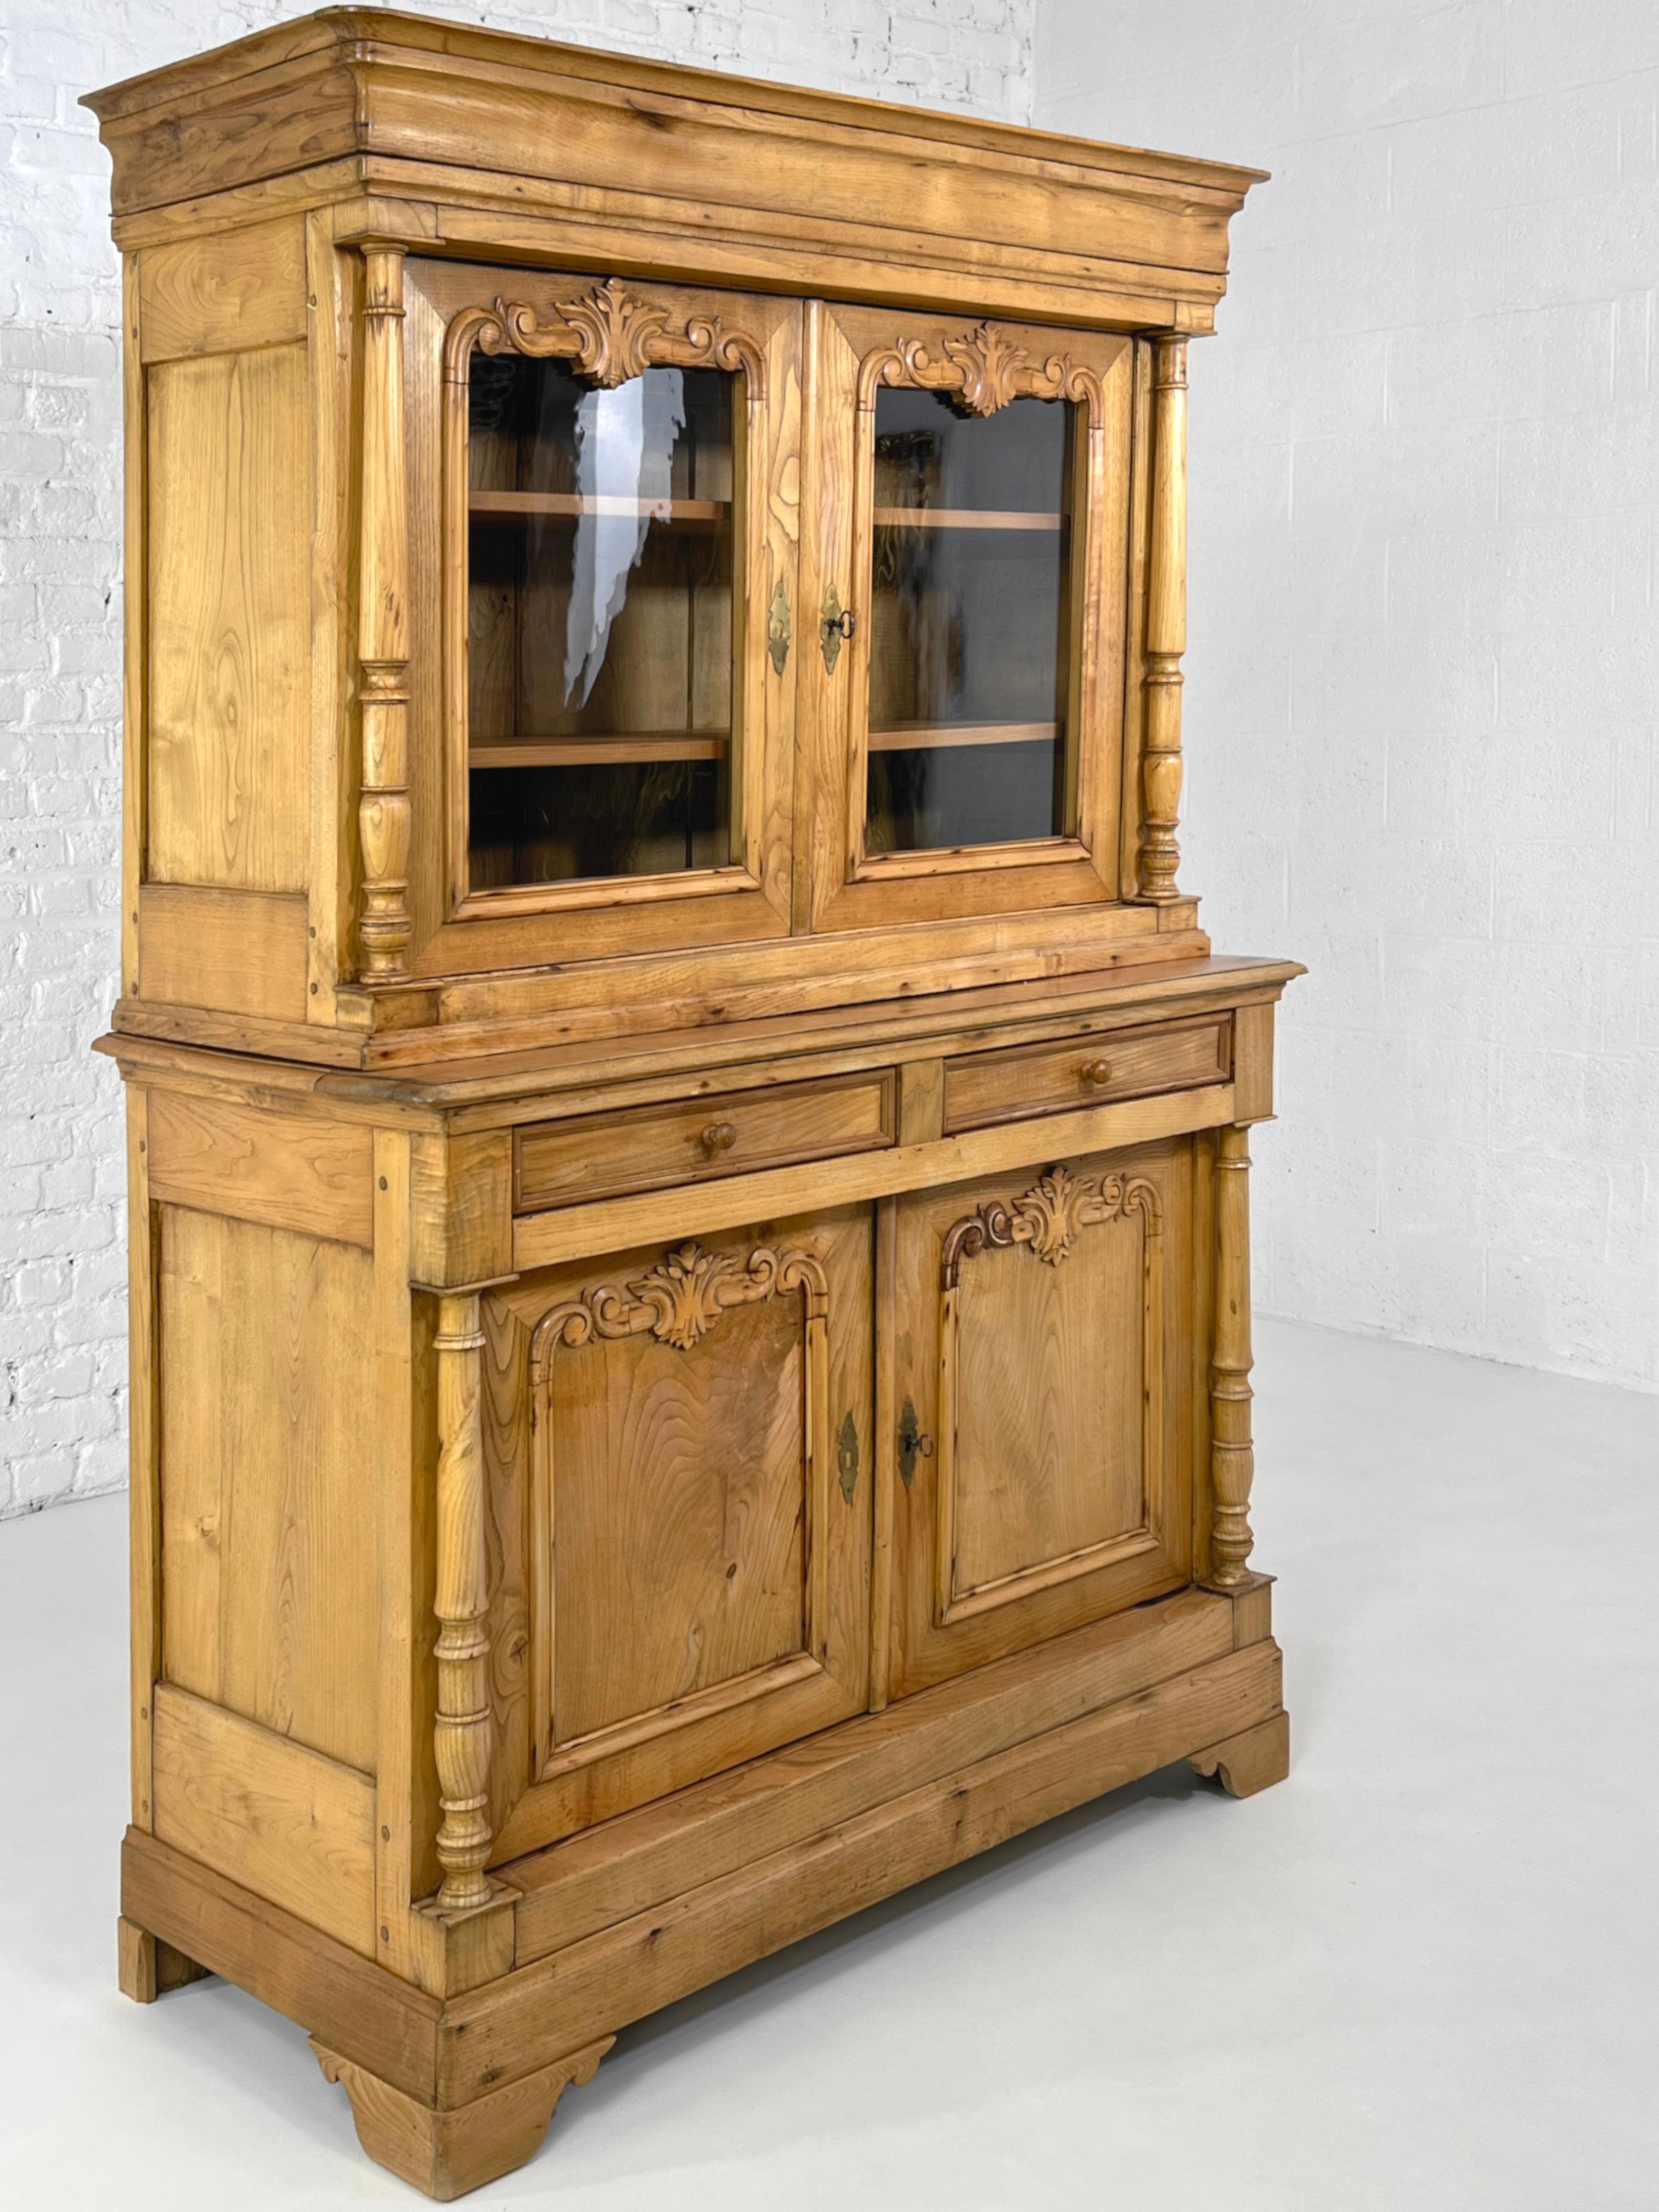 European French Antic Alpine Chalet Chic Pine Wood and Glass Armoire Vitrine Cabinet For Sale